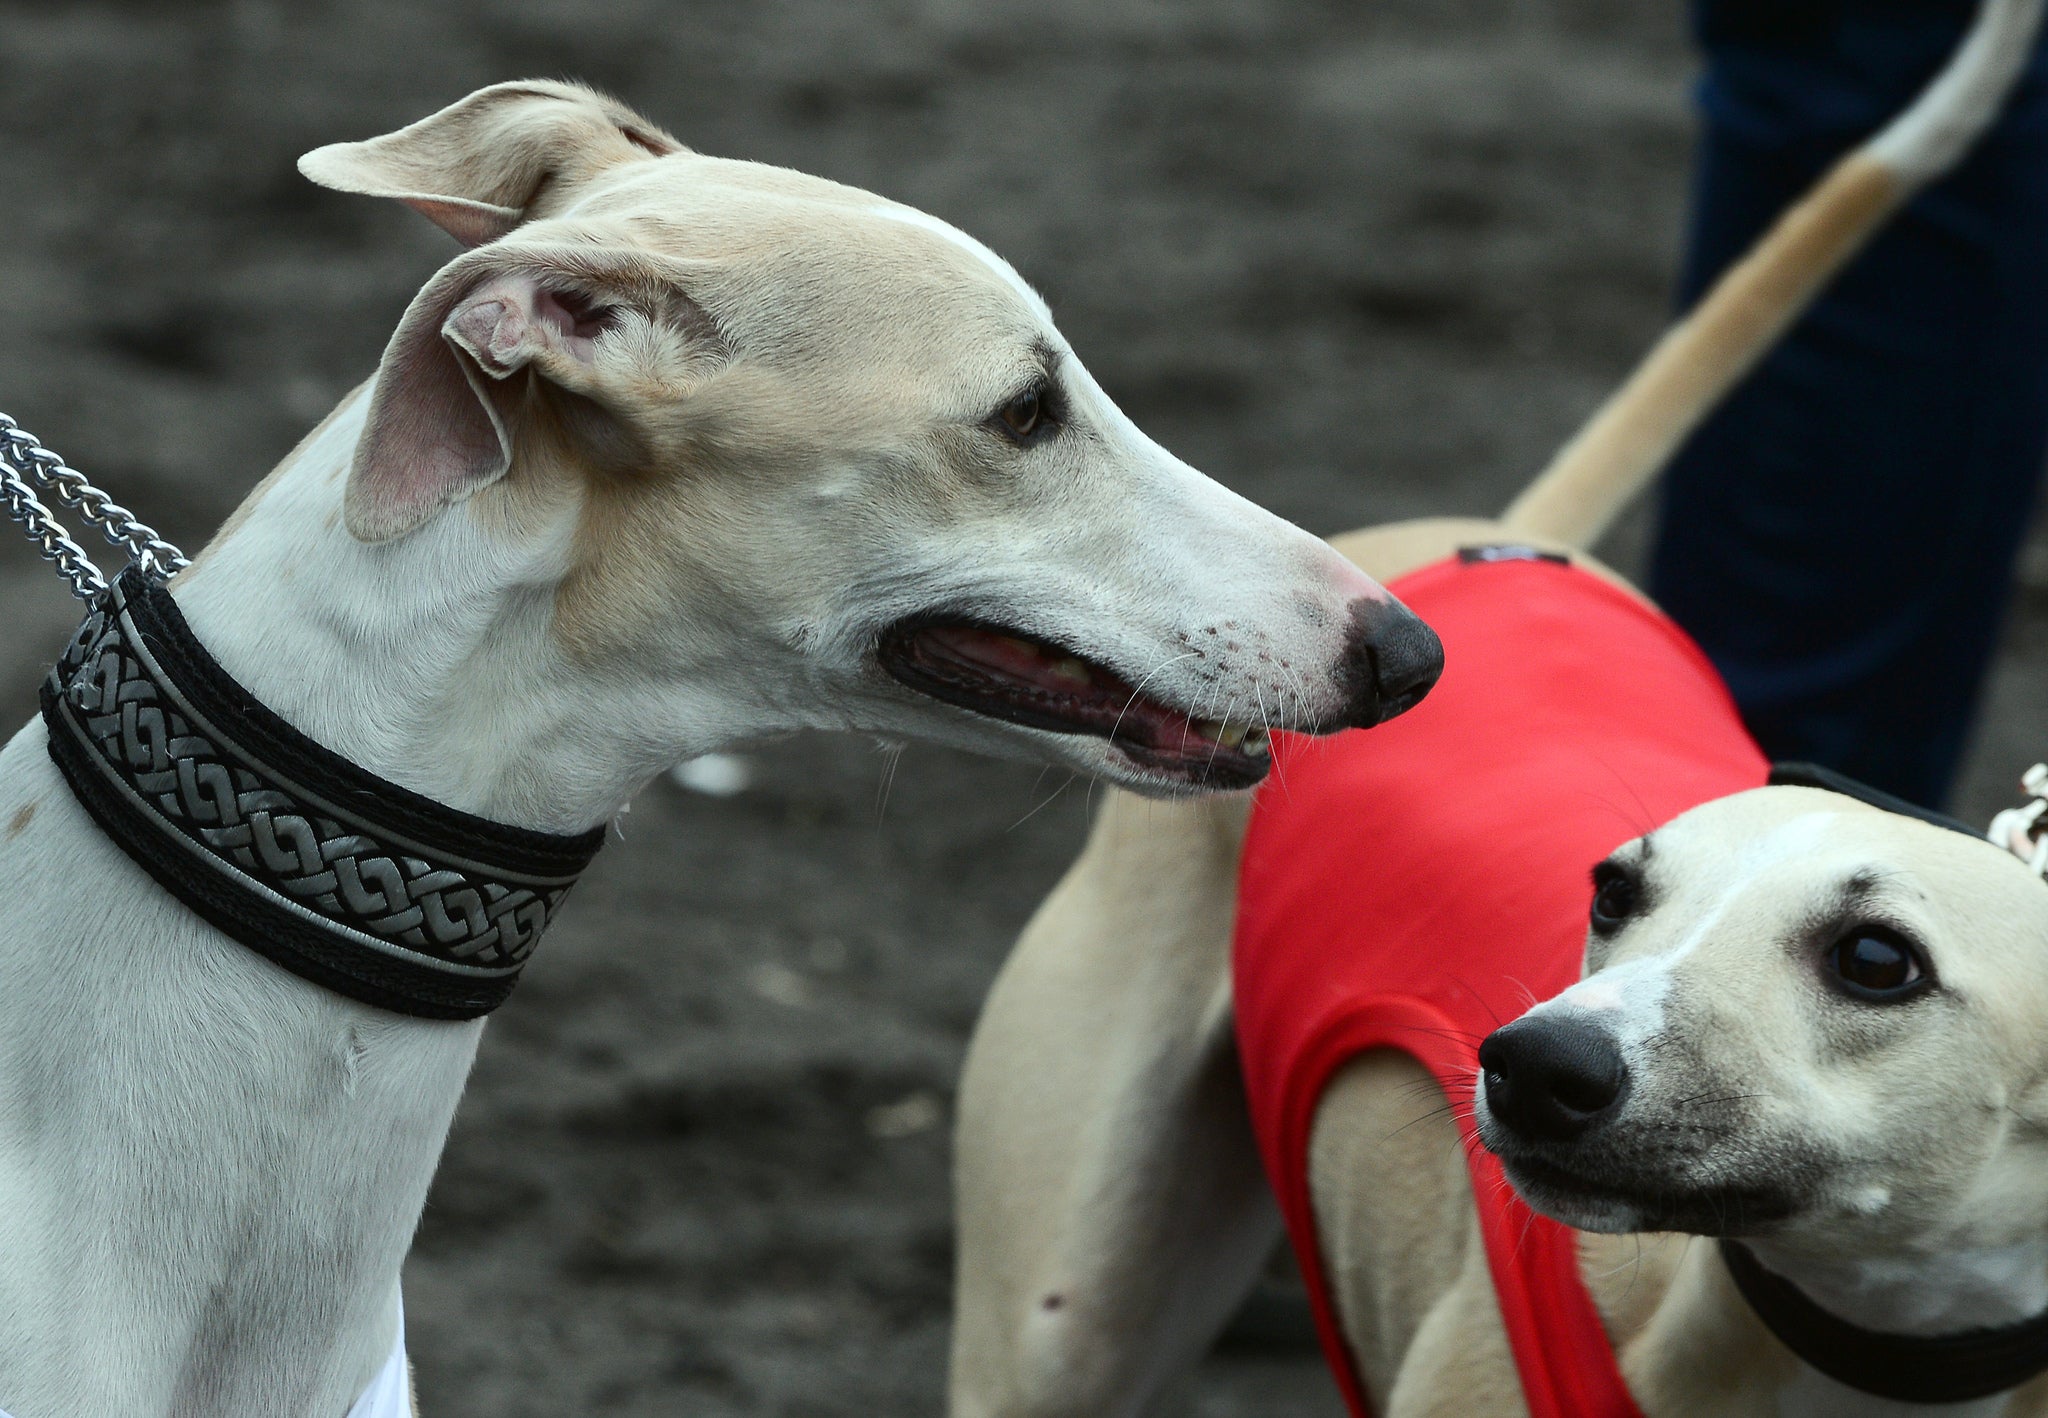 Alabama Rot eventually leads to kidney failure and is more commonly seen with greyhounds, but there are fears that it is now beginning to affect other breeds